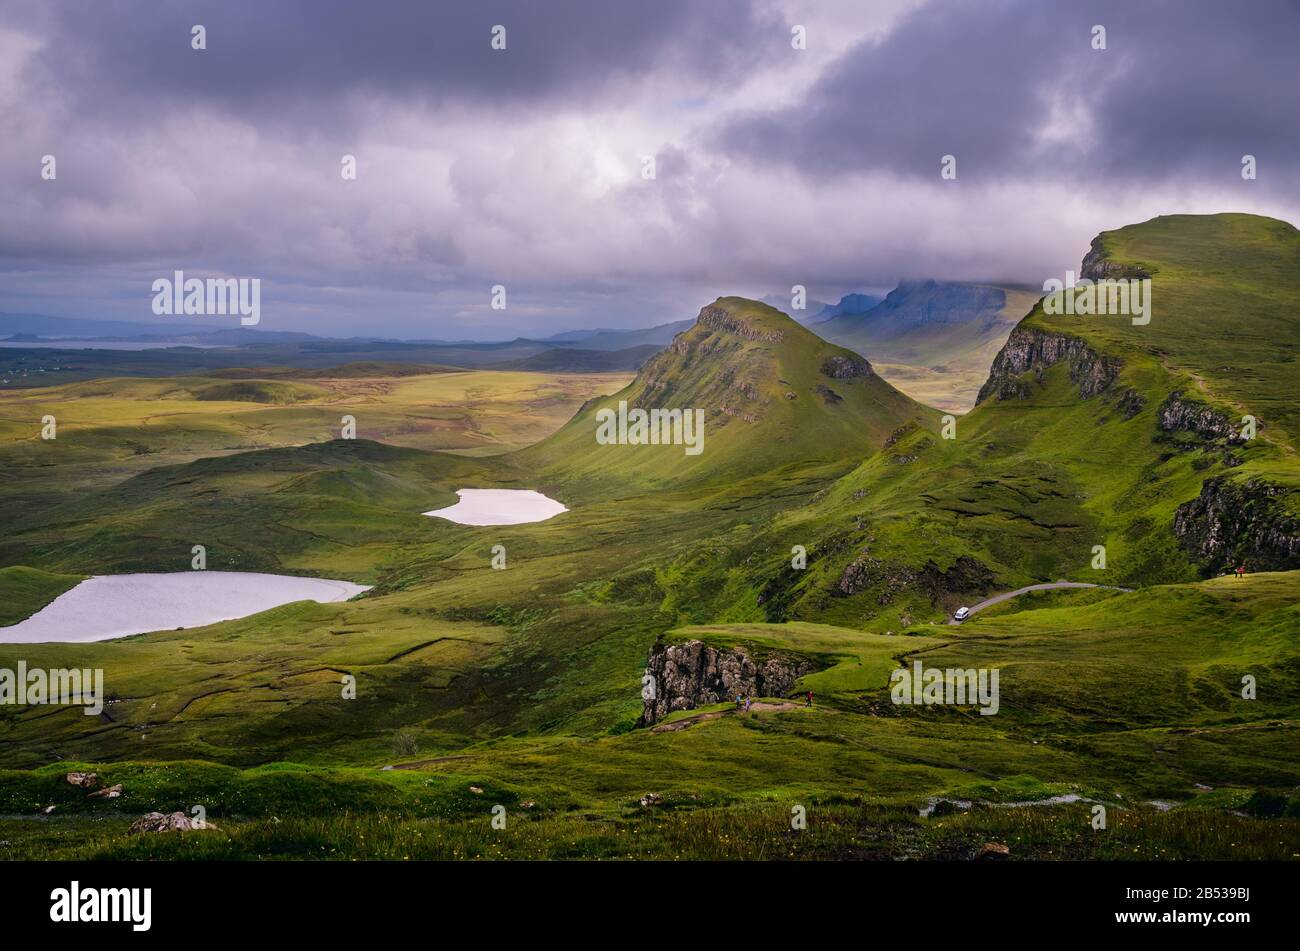 Quiraing trail and a view on hills and cliffs, Isle Of Skye, Scotland, UK Stock Photo